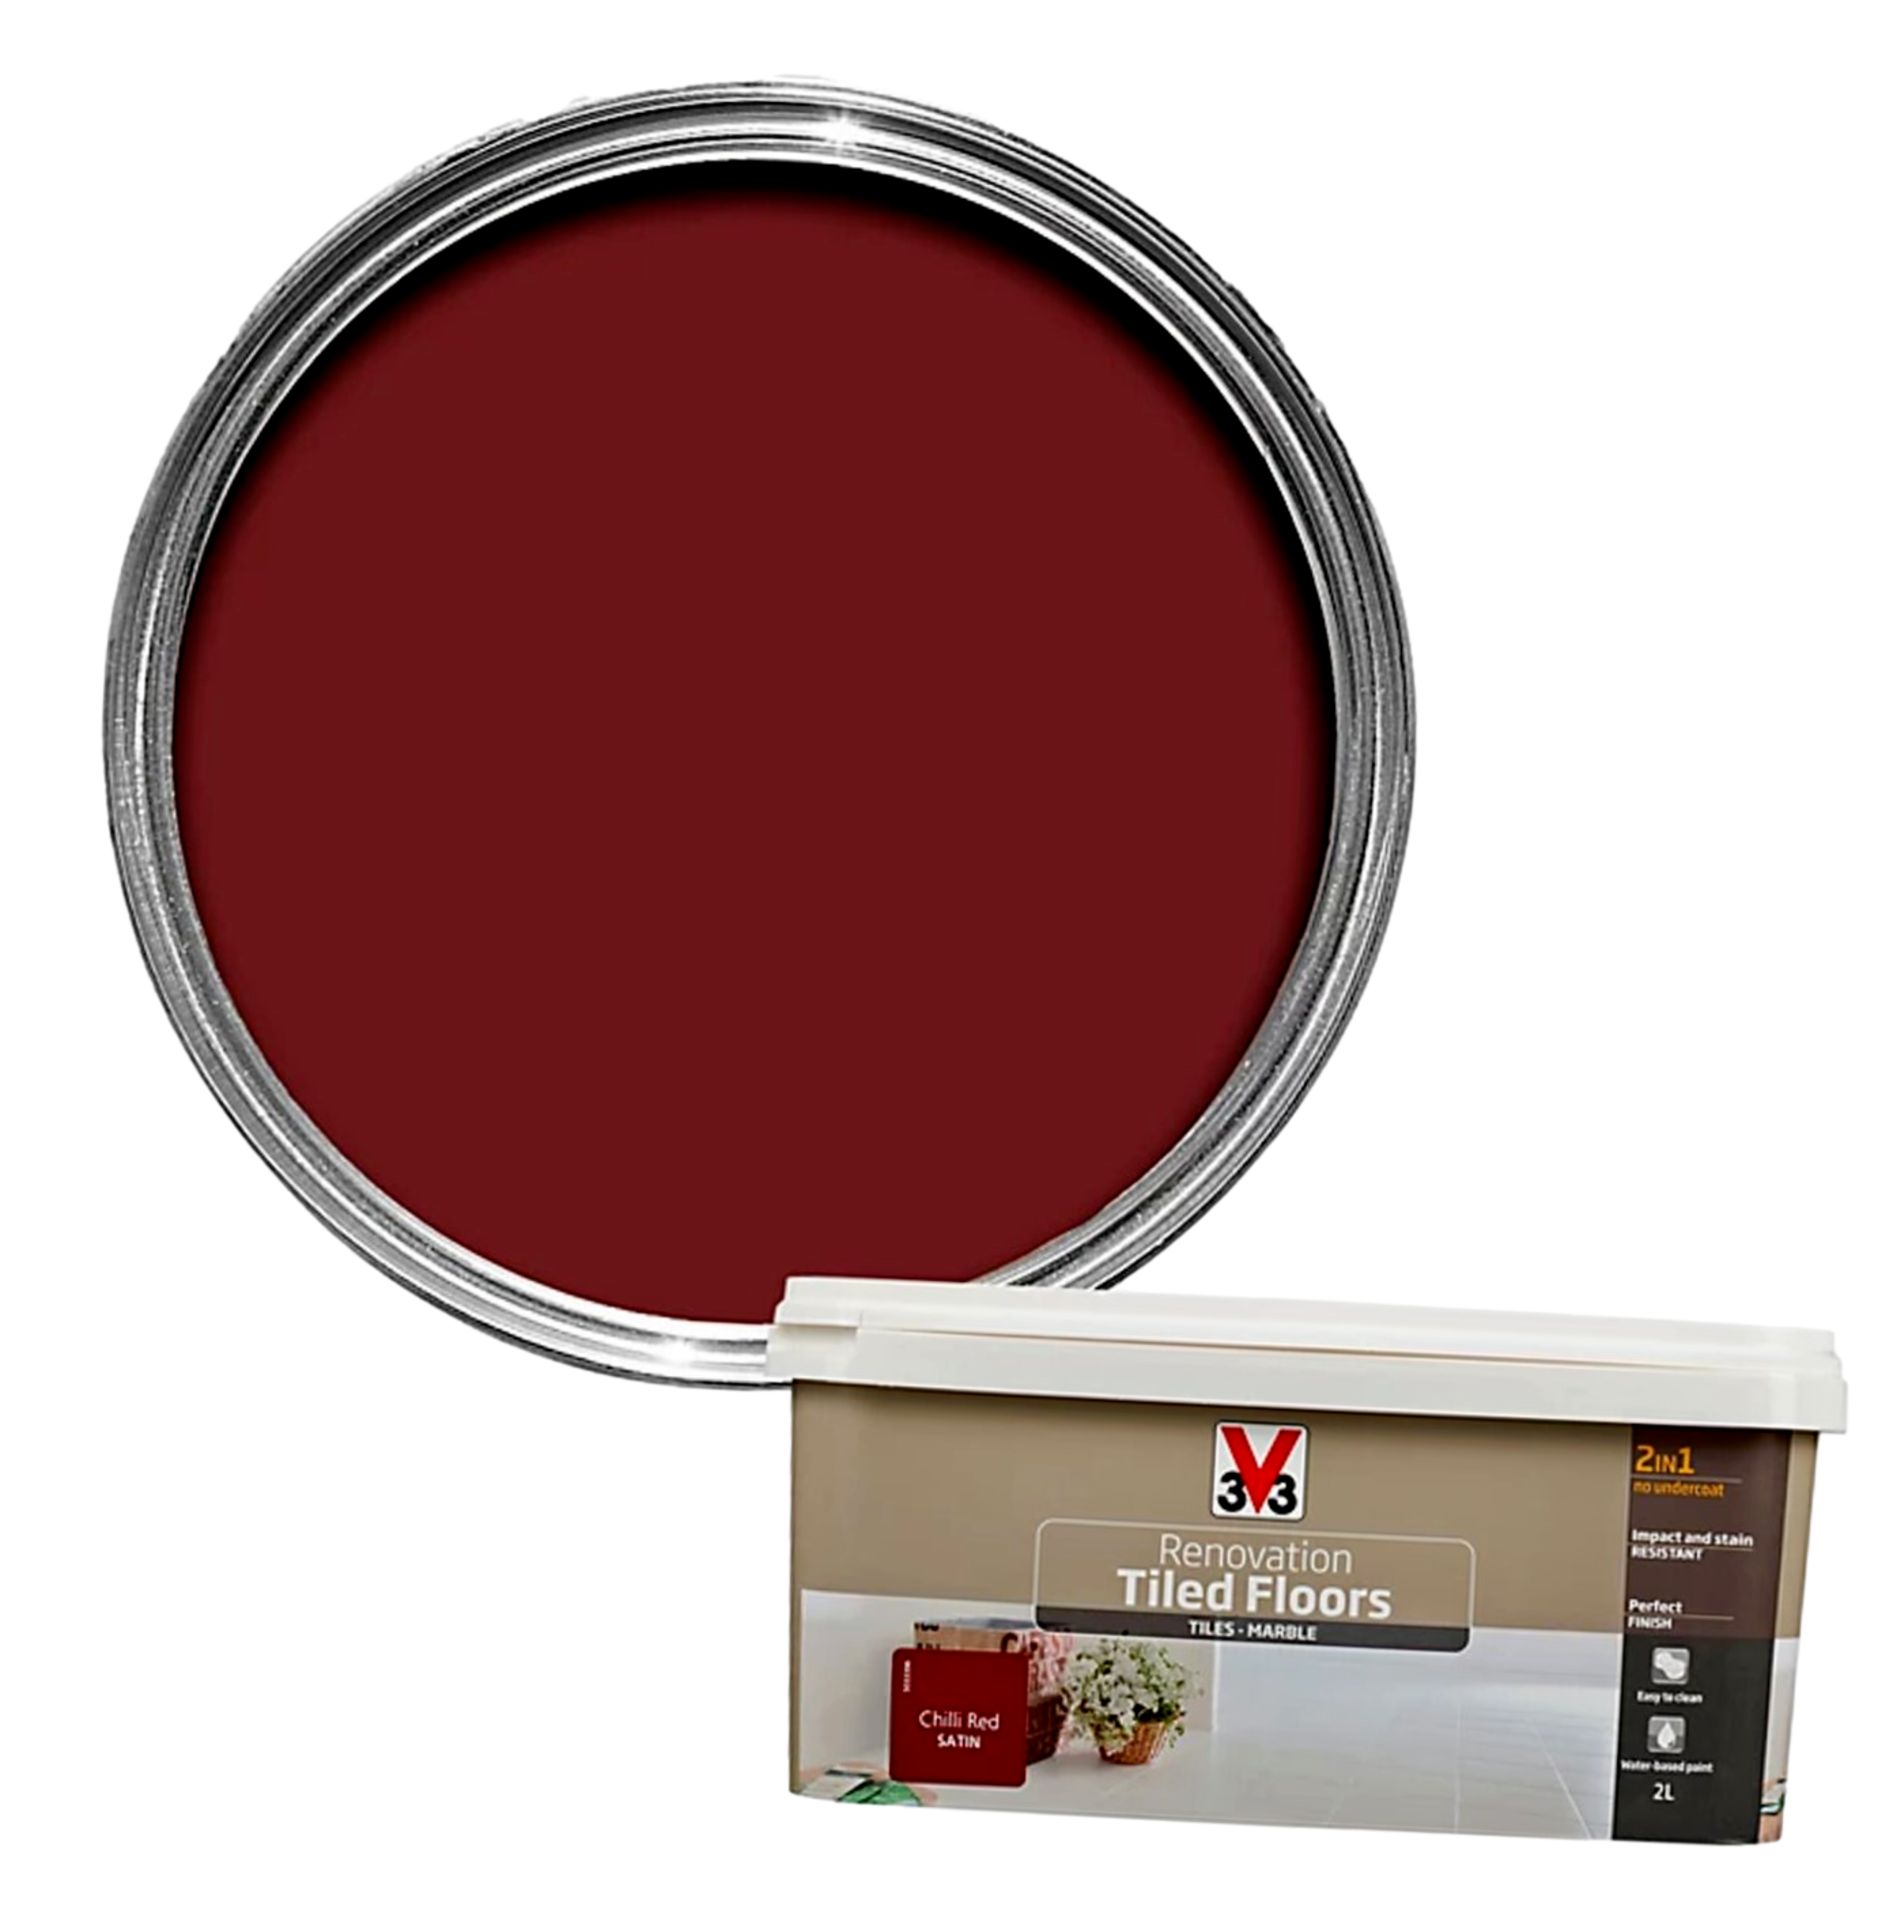 30 X NEW 2 LITRE CHILLI RED SATIN FLOOR STEP STAIR TILE PAINT 2L MULTI SURFACE PAINT RRP £300 - Image 2 of 3